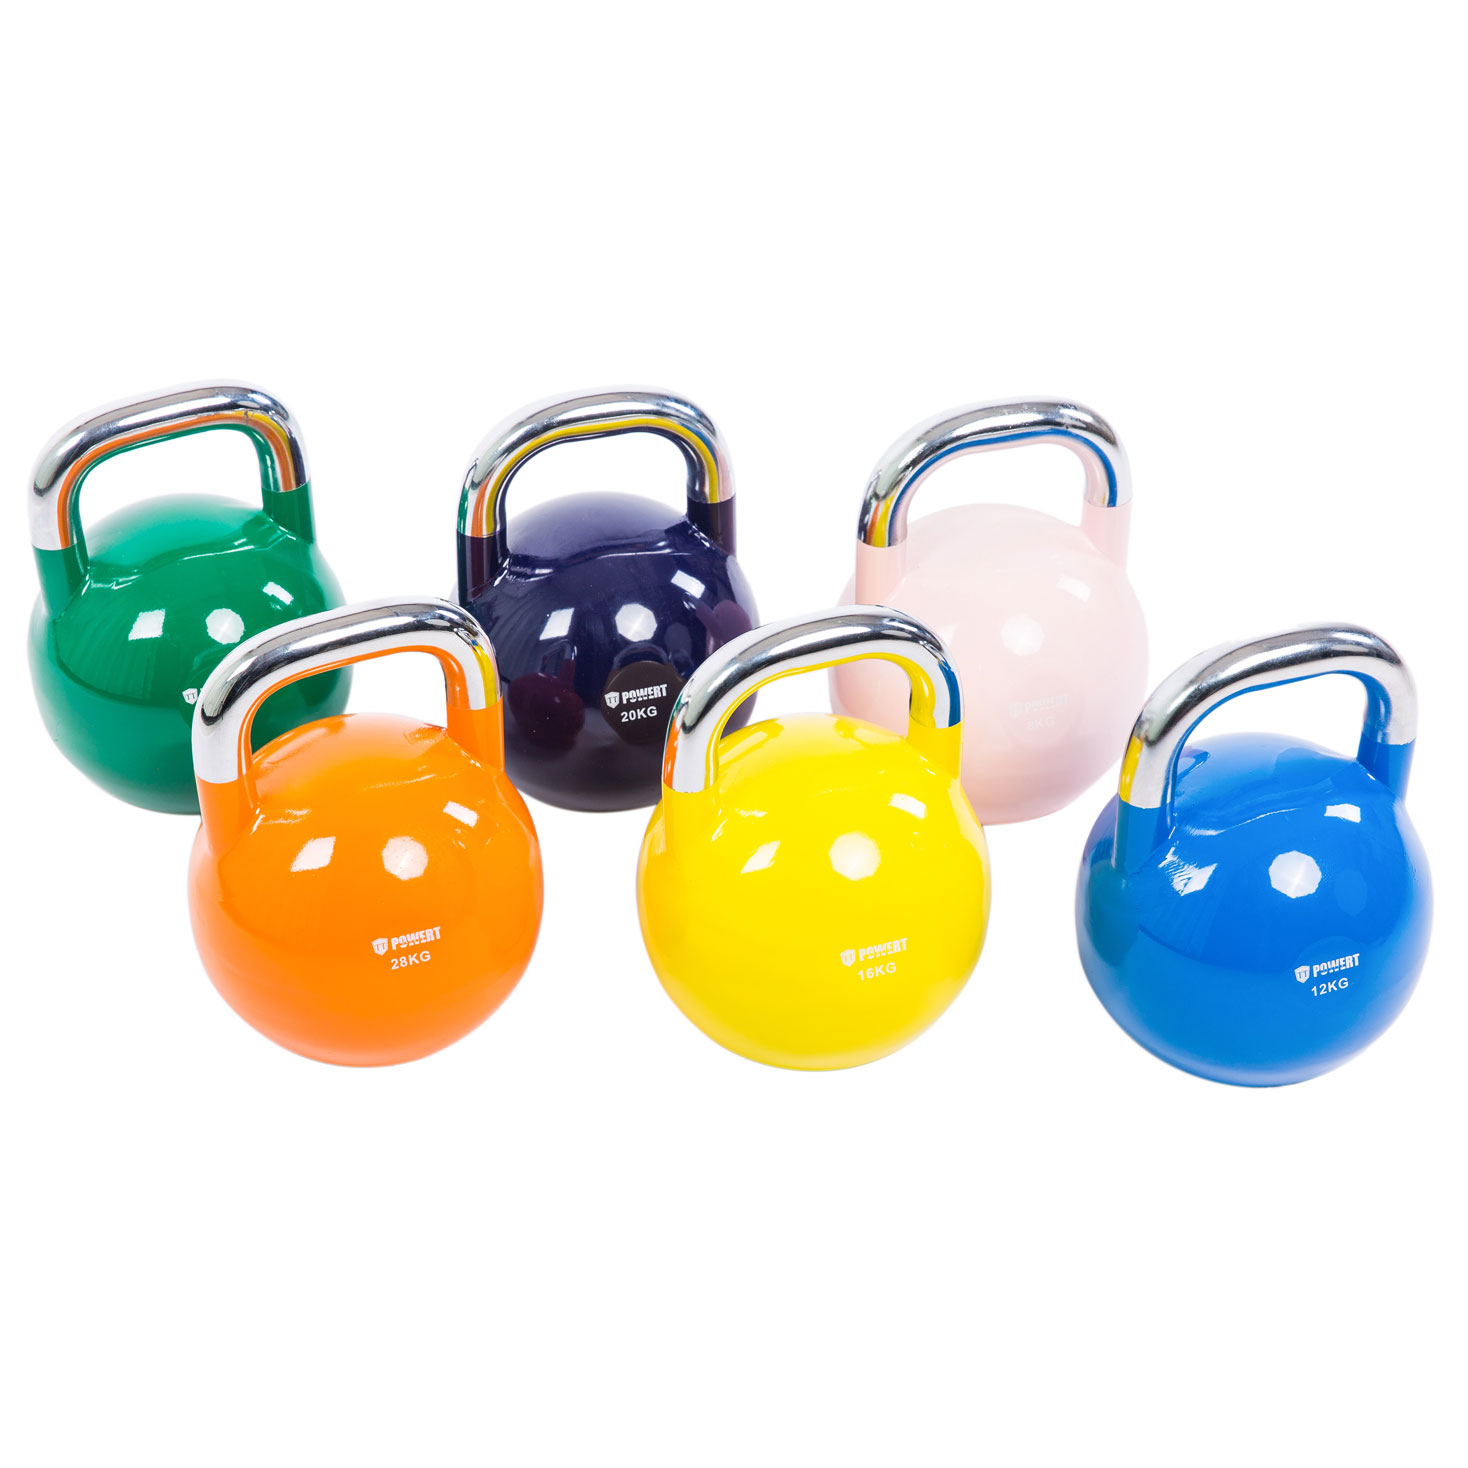 POWERT Competition Kettlebell - DDG and Home Gym Equipment